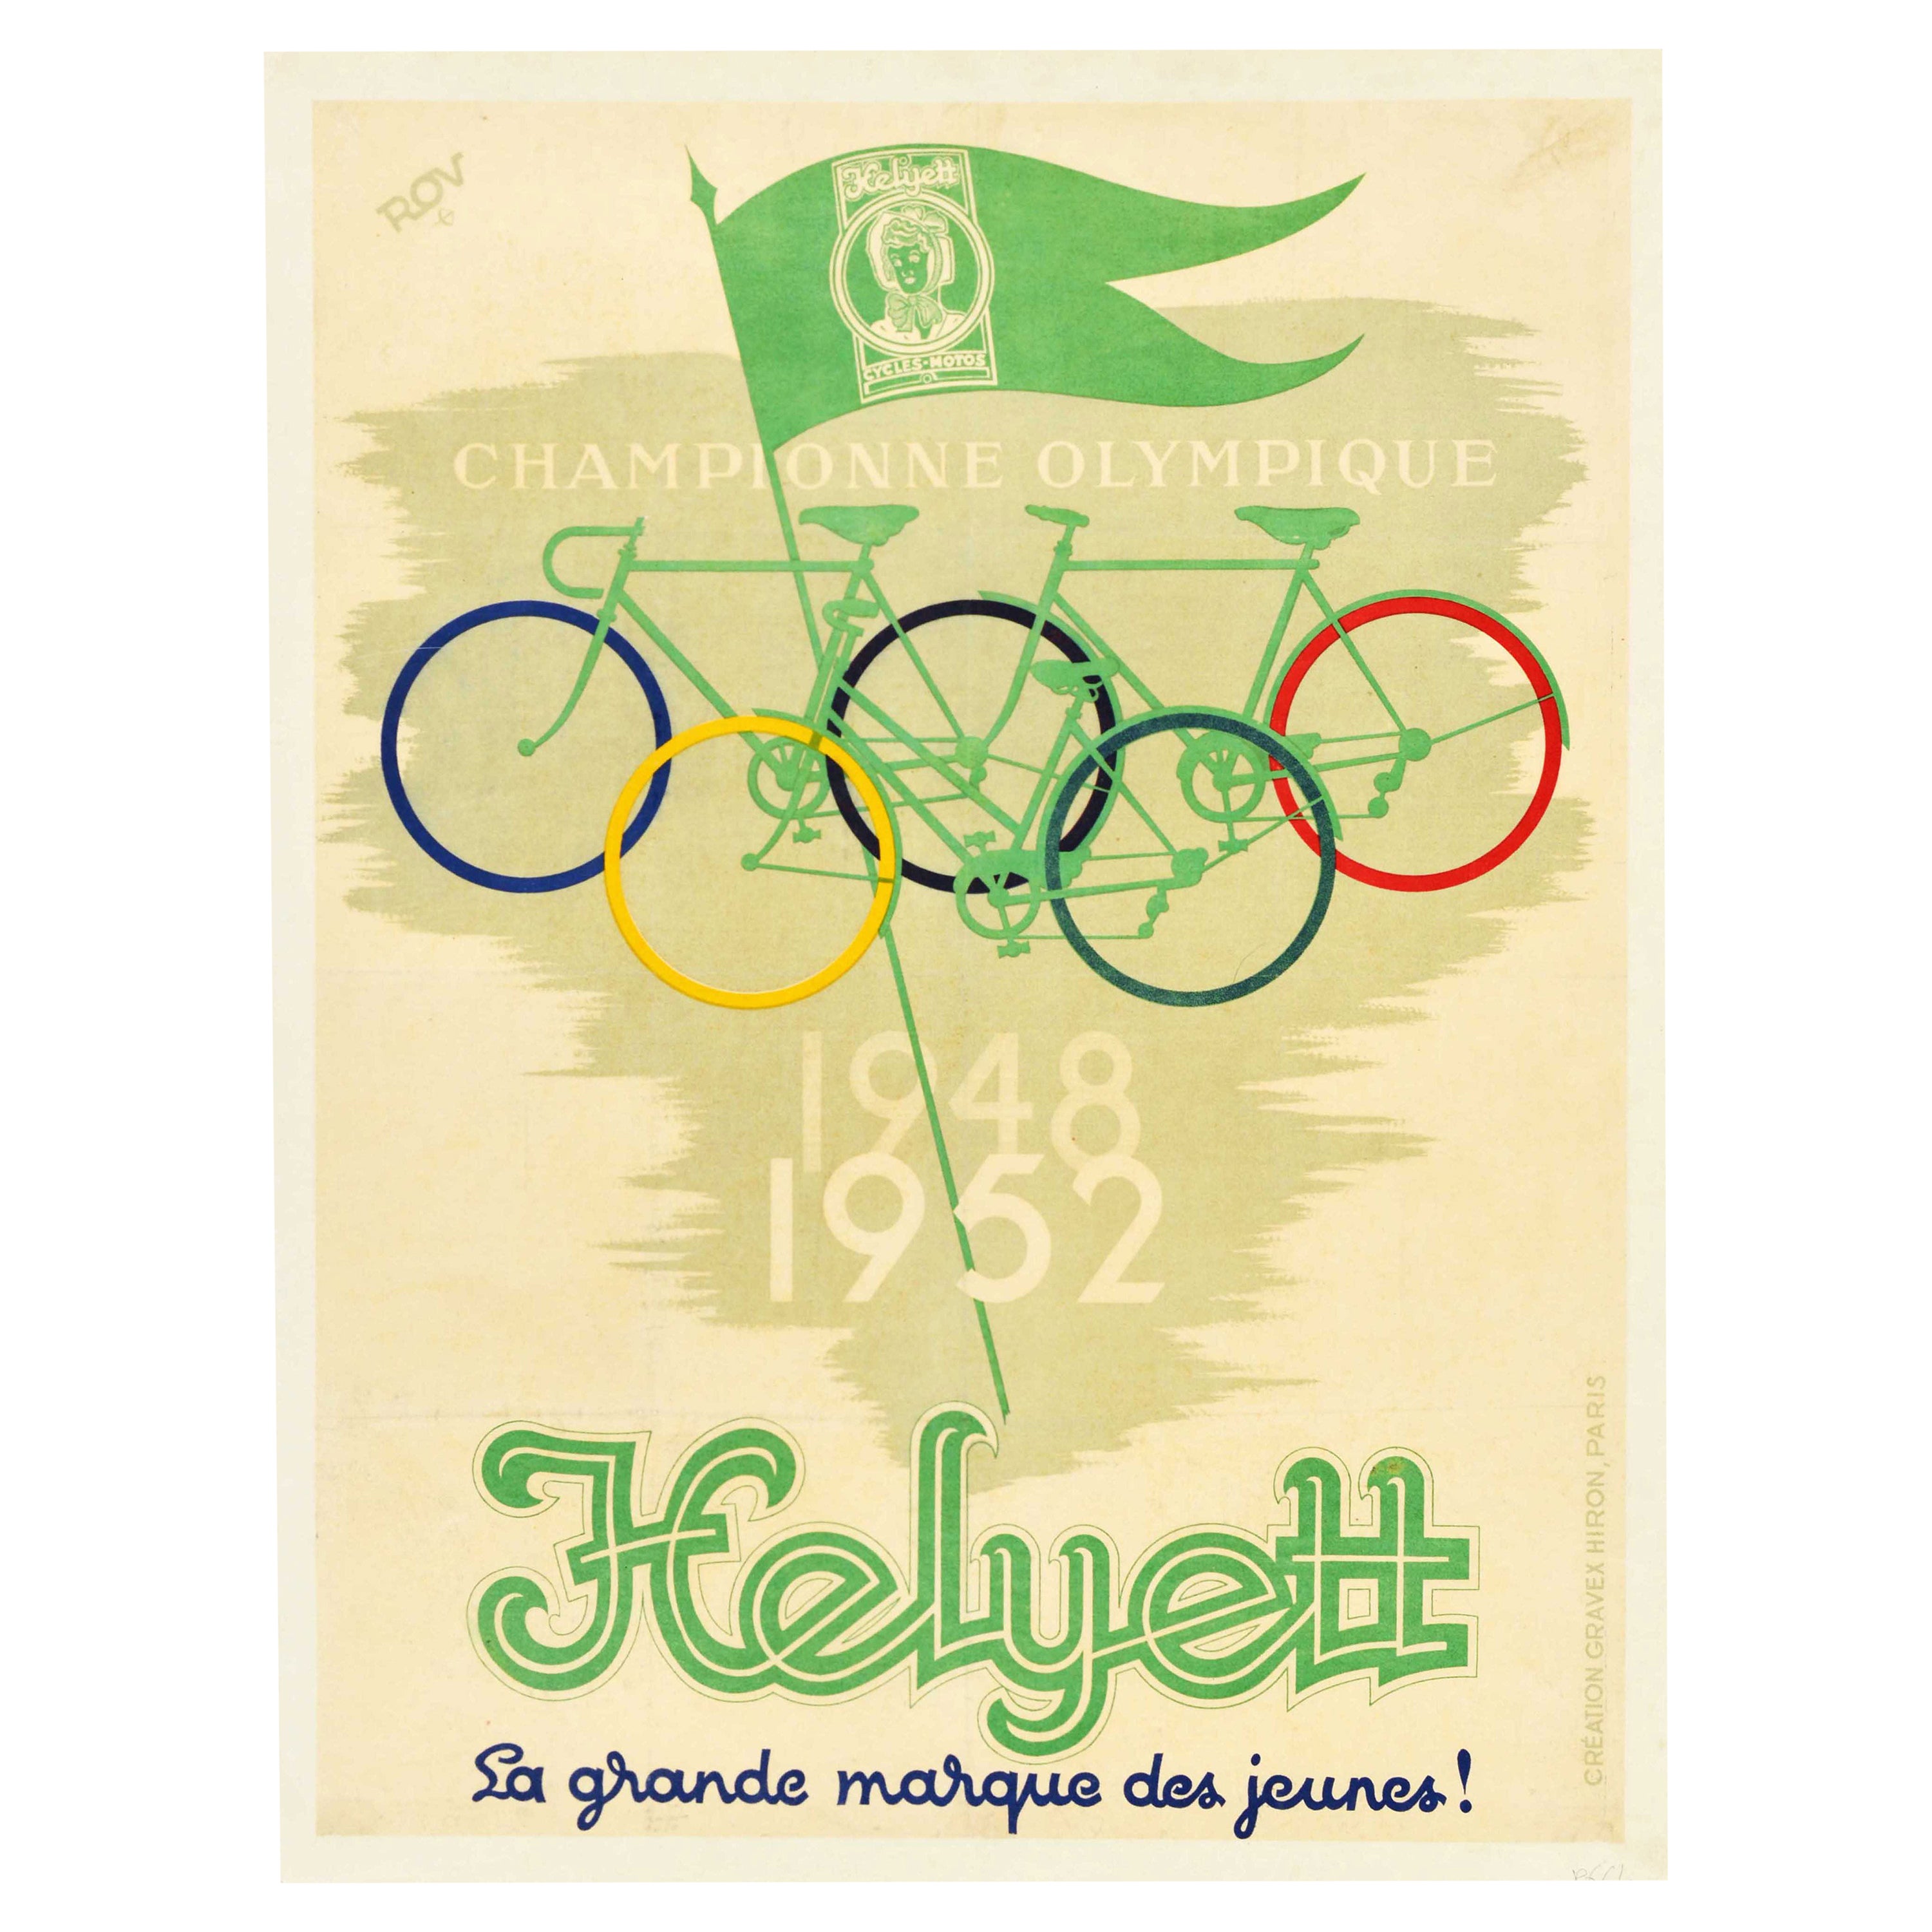 Original Vintage Poster Cycles Helyett Olympic Champion Bicycle Advertising Art For Sale